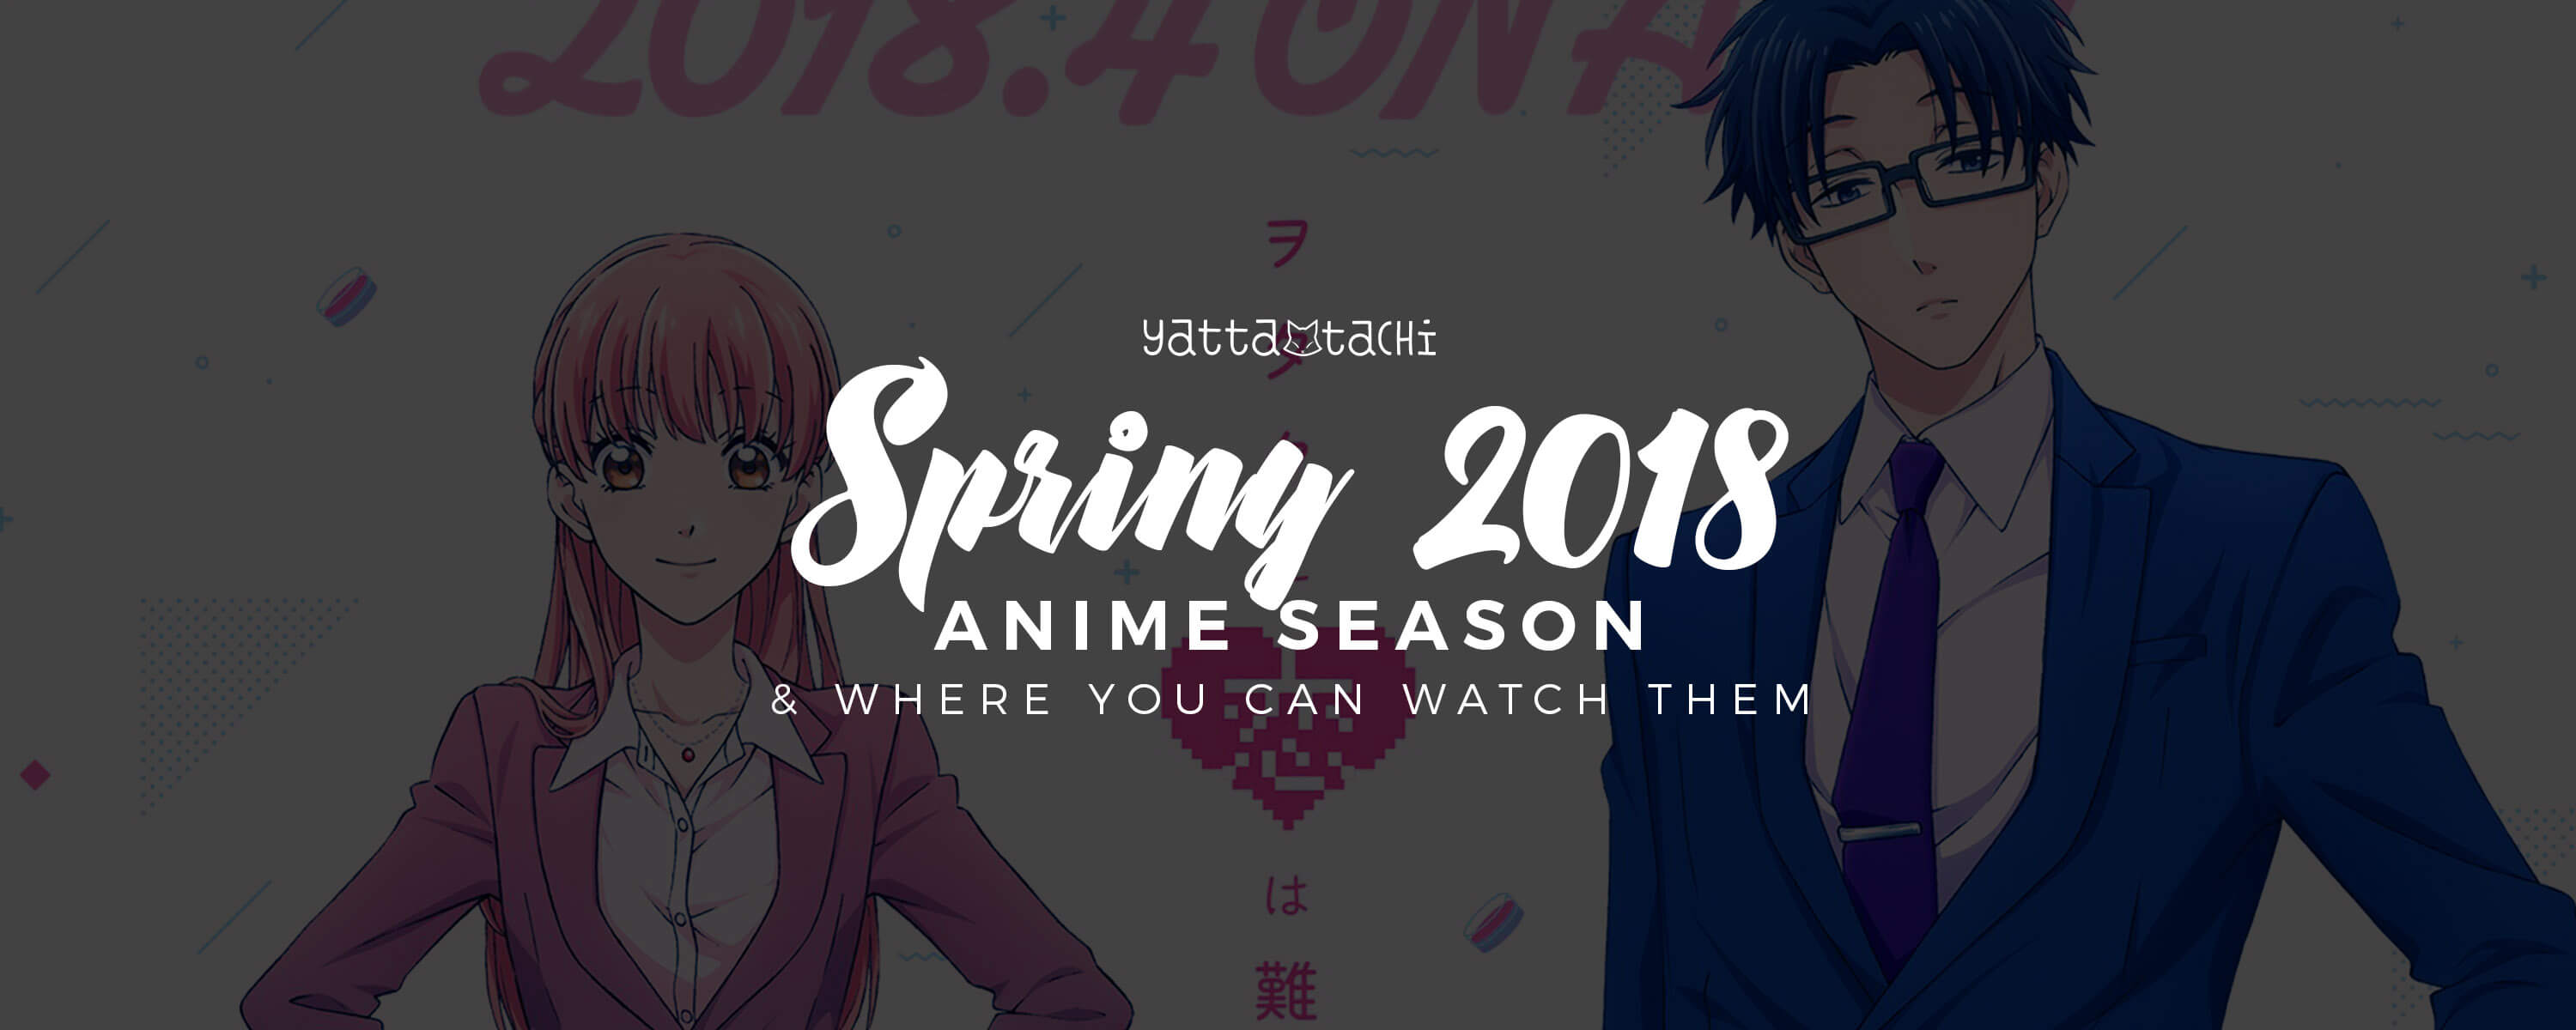 Spring 2018 Anime & Where You Can Watch Them